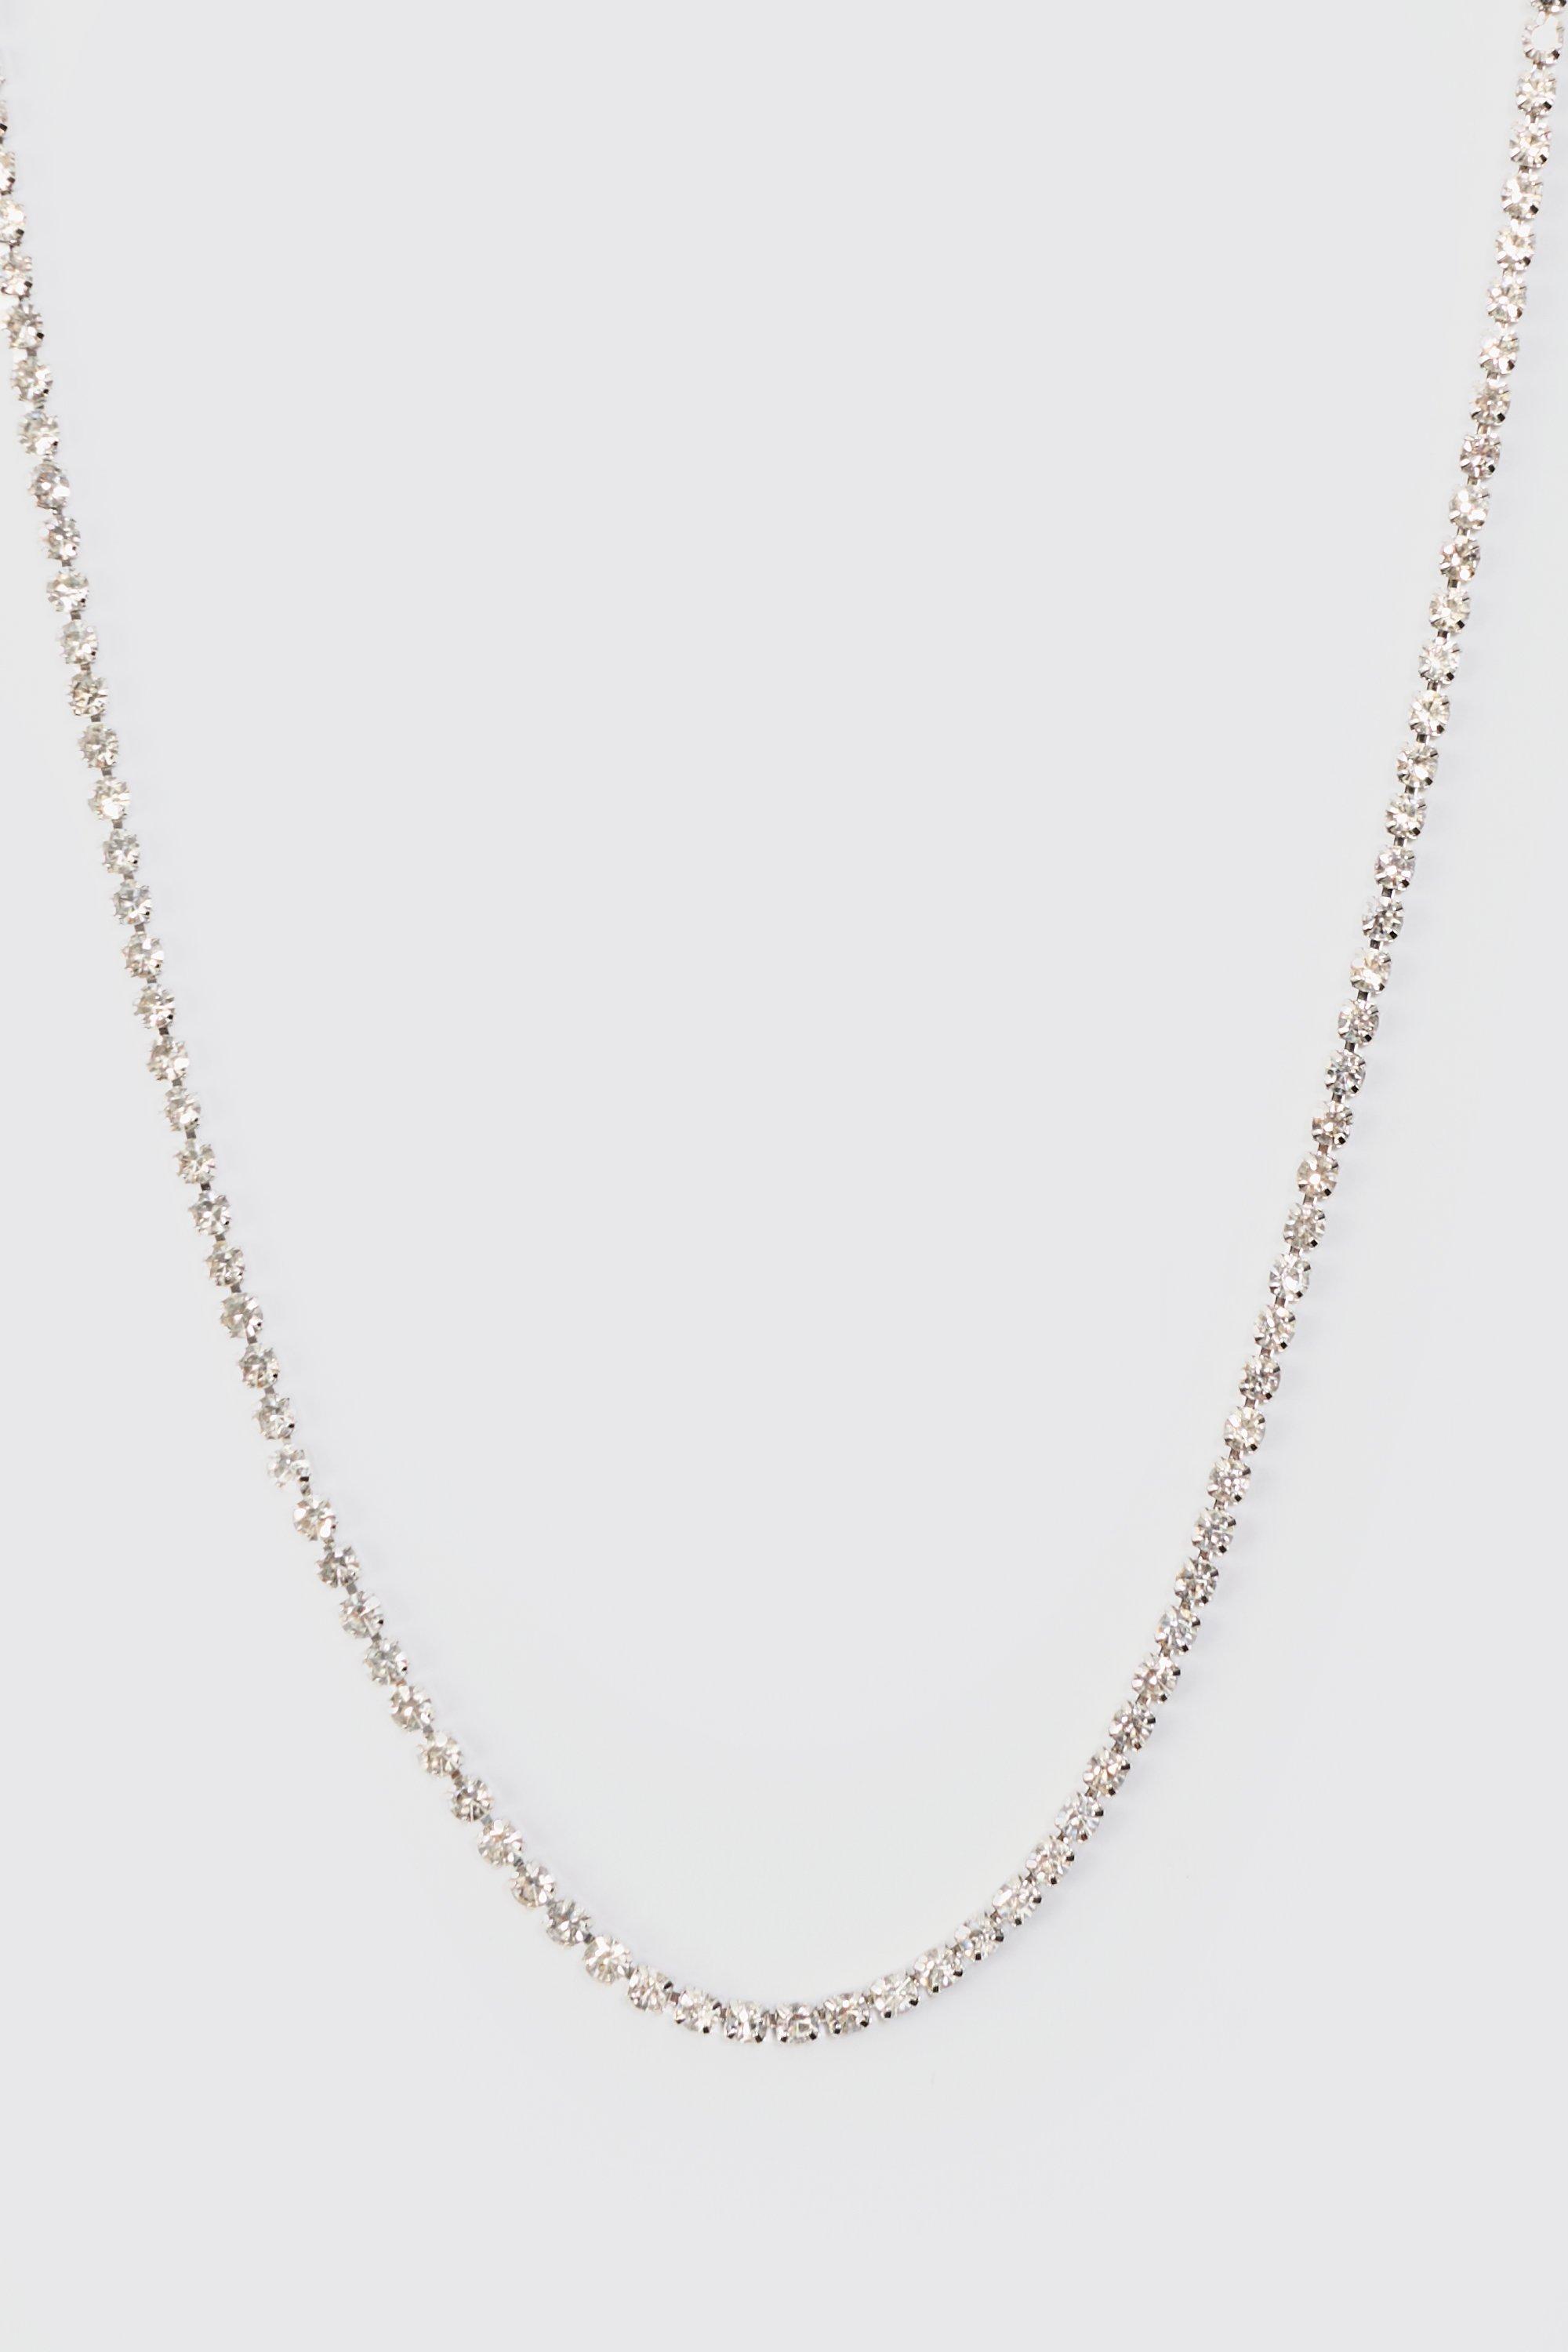 Image of Iced Chain Necklace In Silver, Grigio